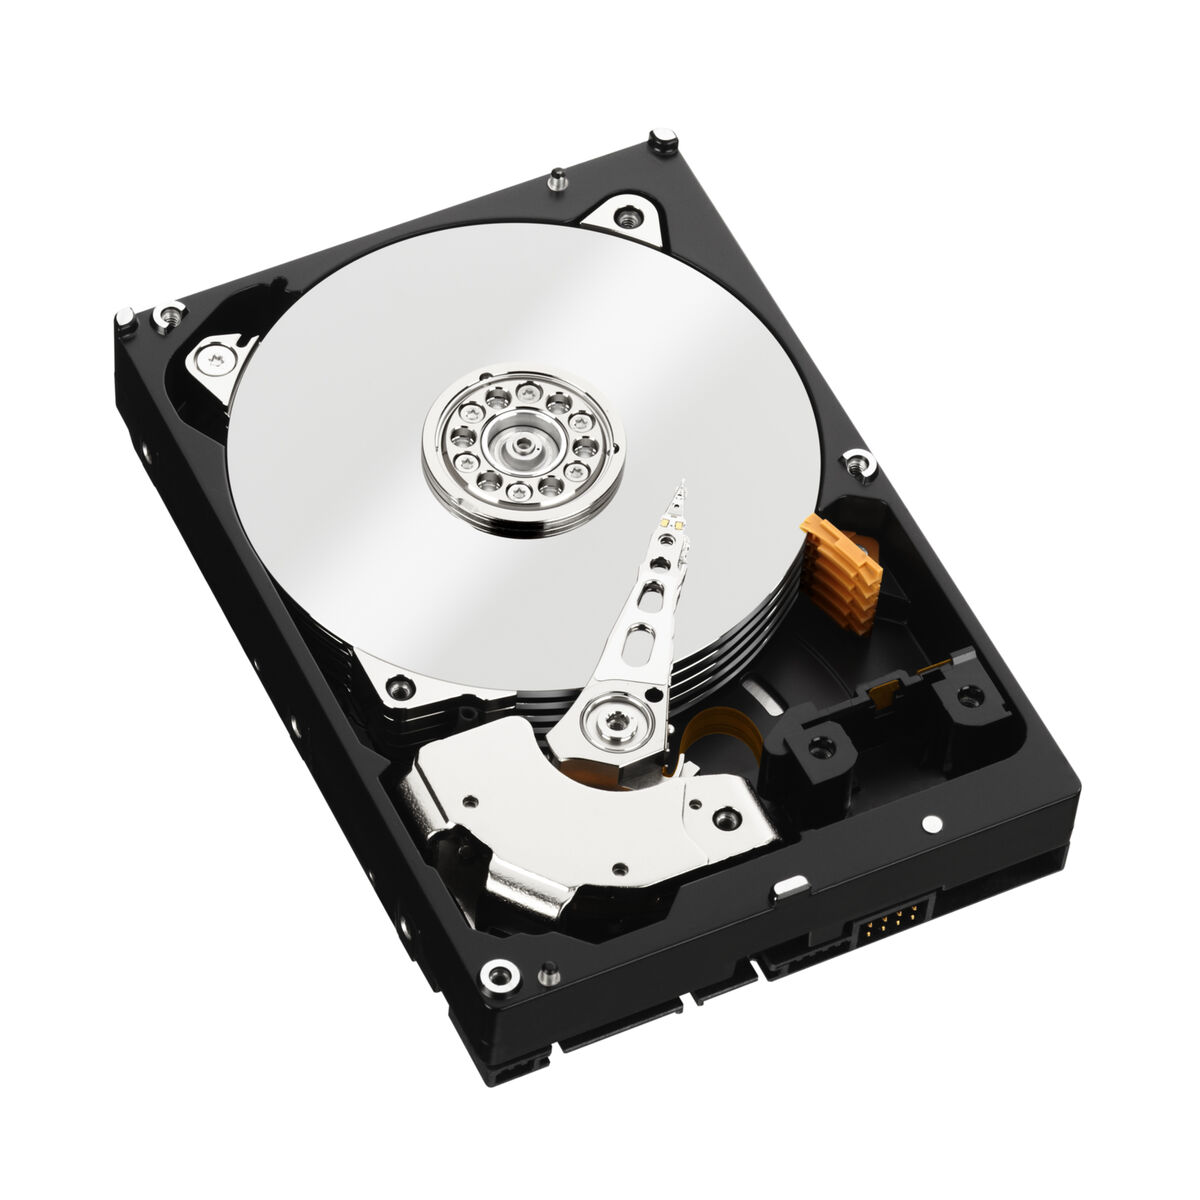 HDD WD Red Plus WD10EFRX 1TB/8,9/600 Sata III 64MB (D) (CMR)